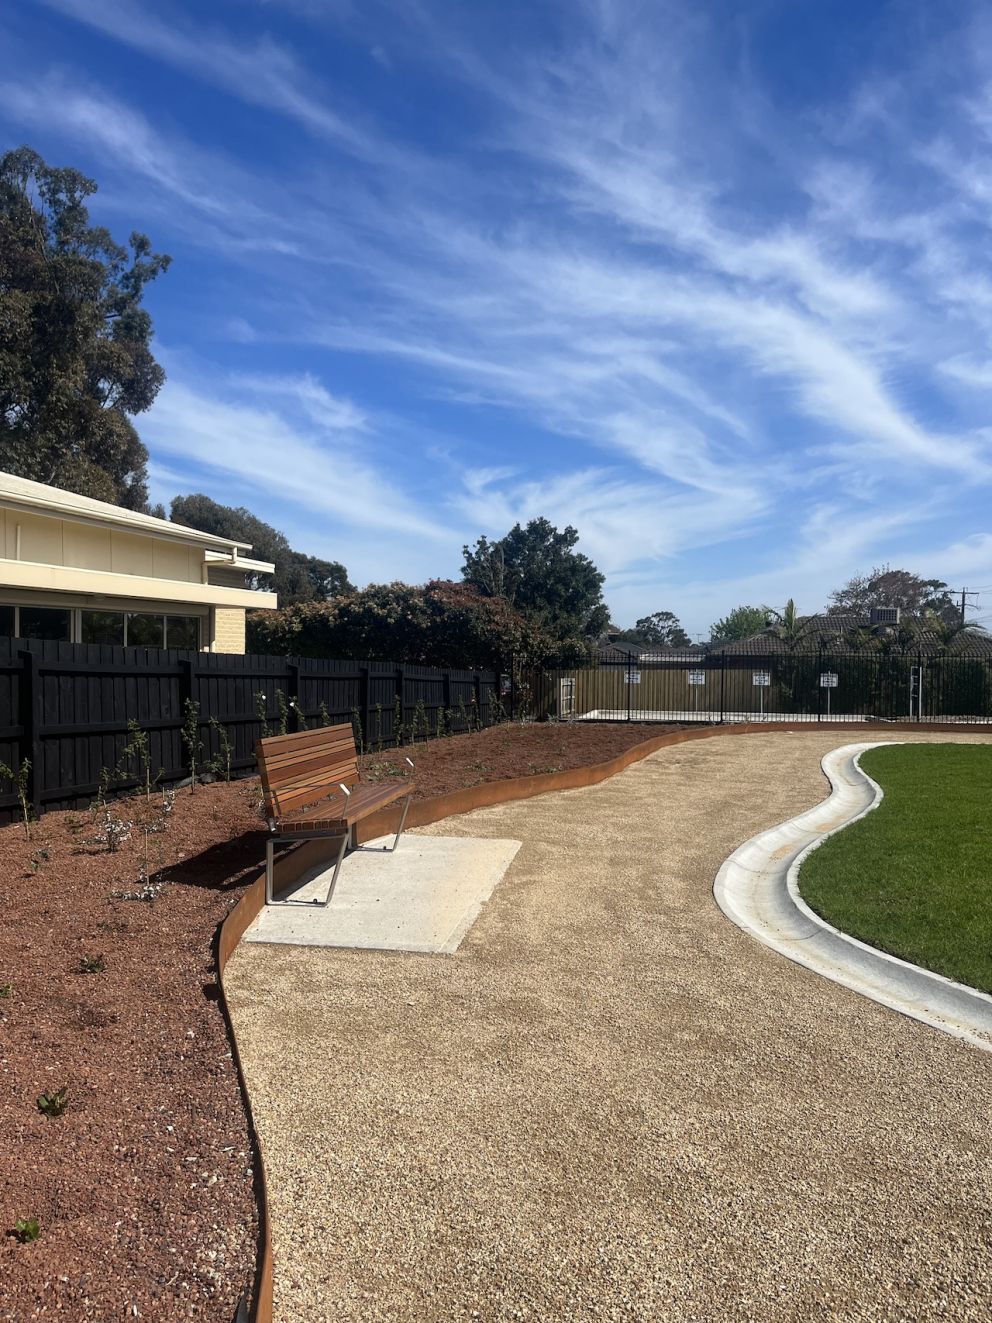 Pocket park path, garden bed and seat for the community to enjoy